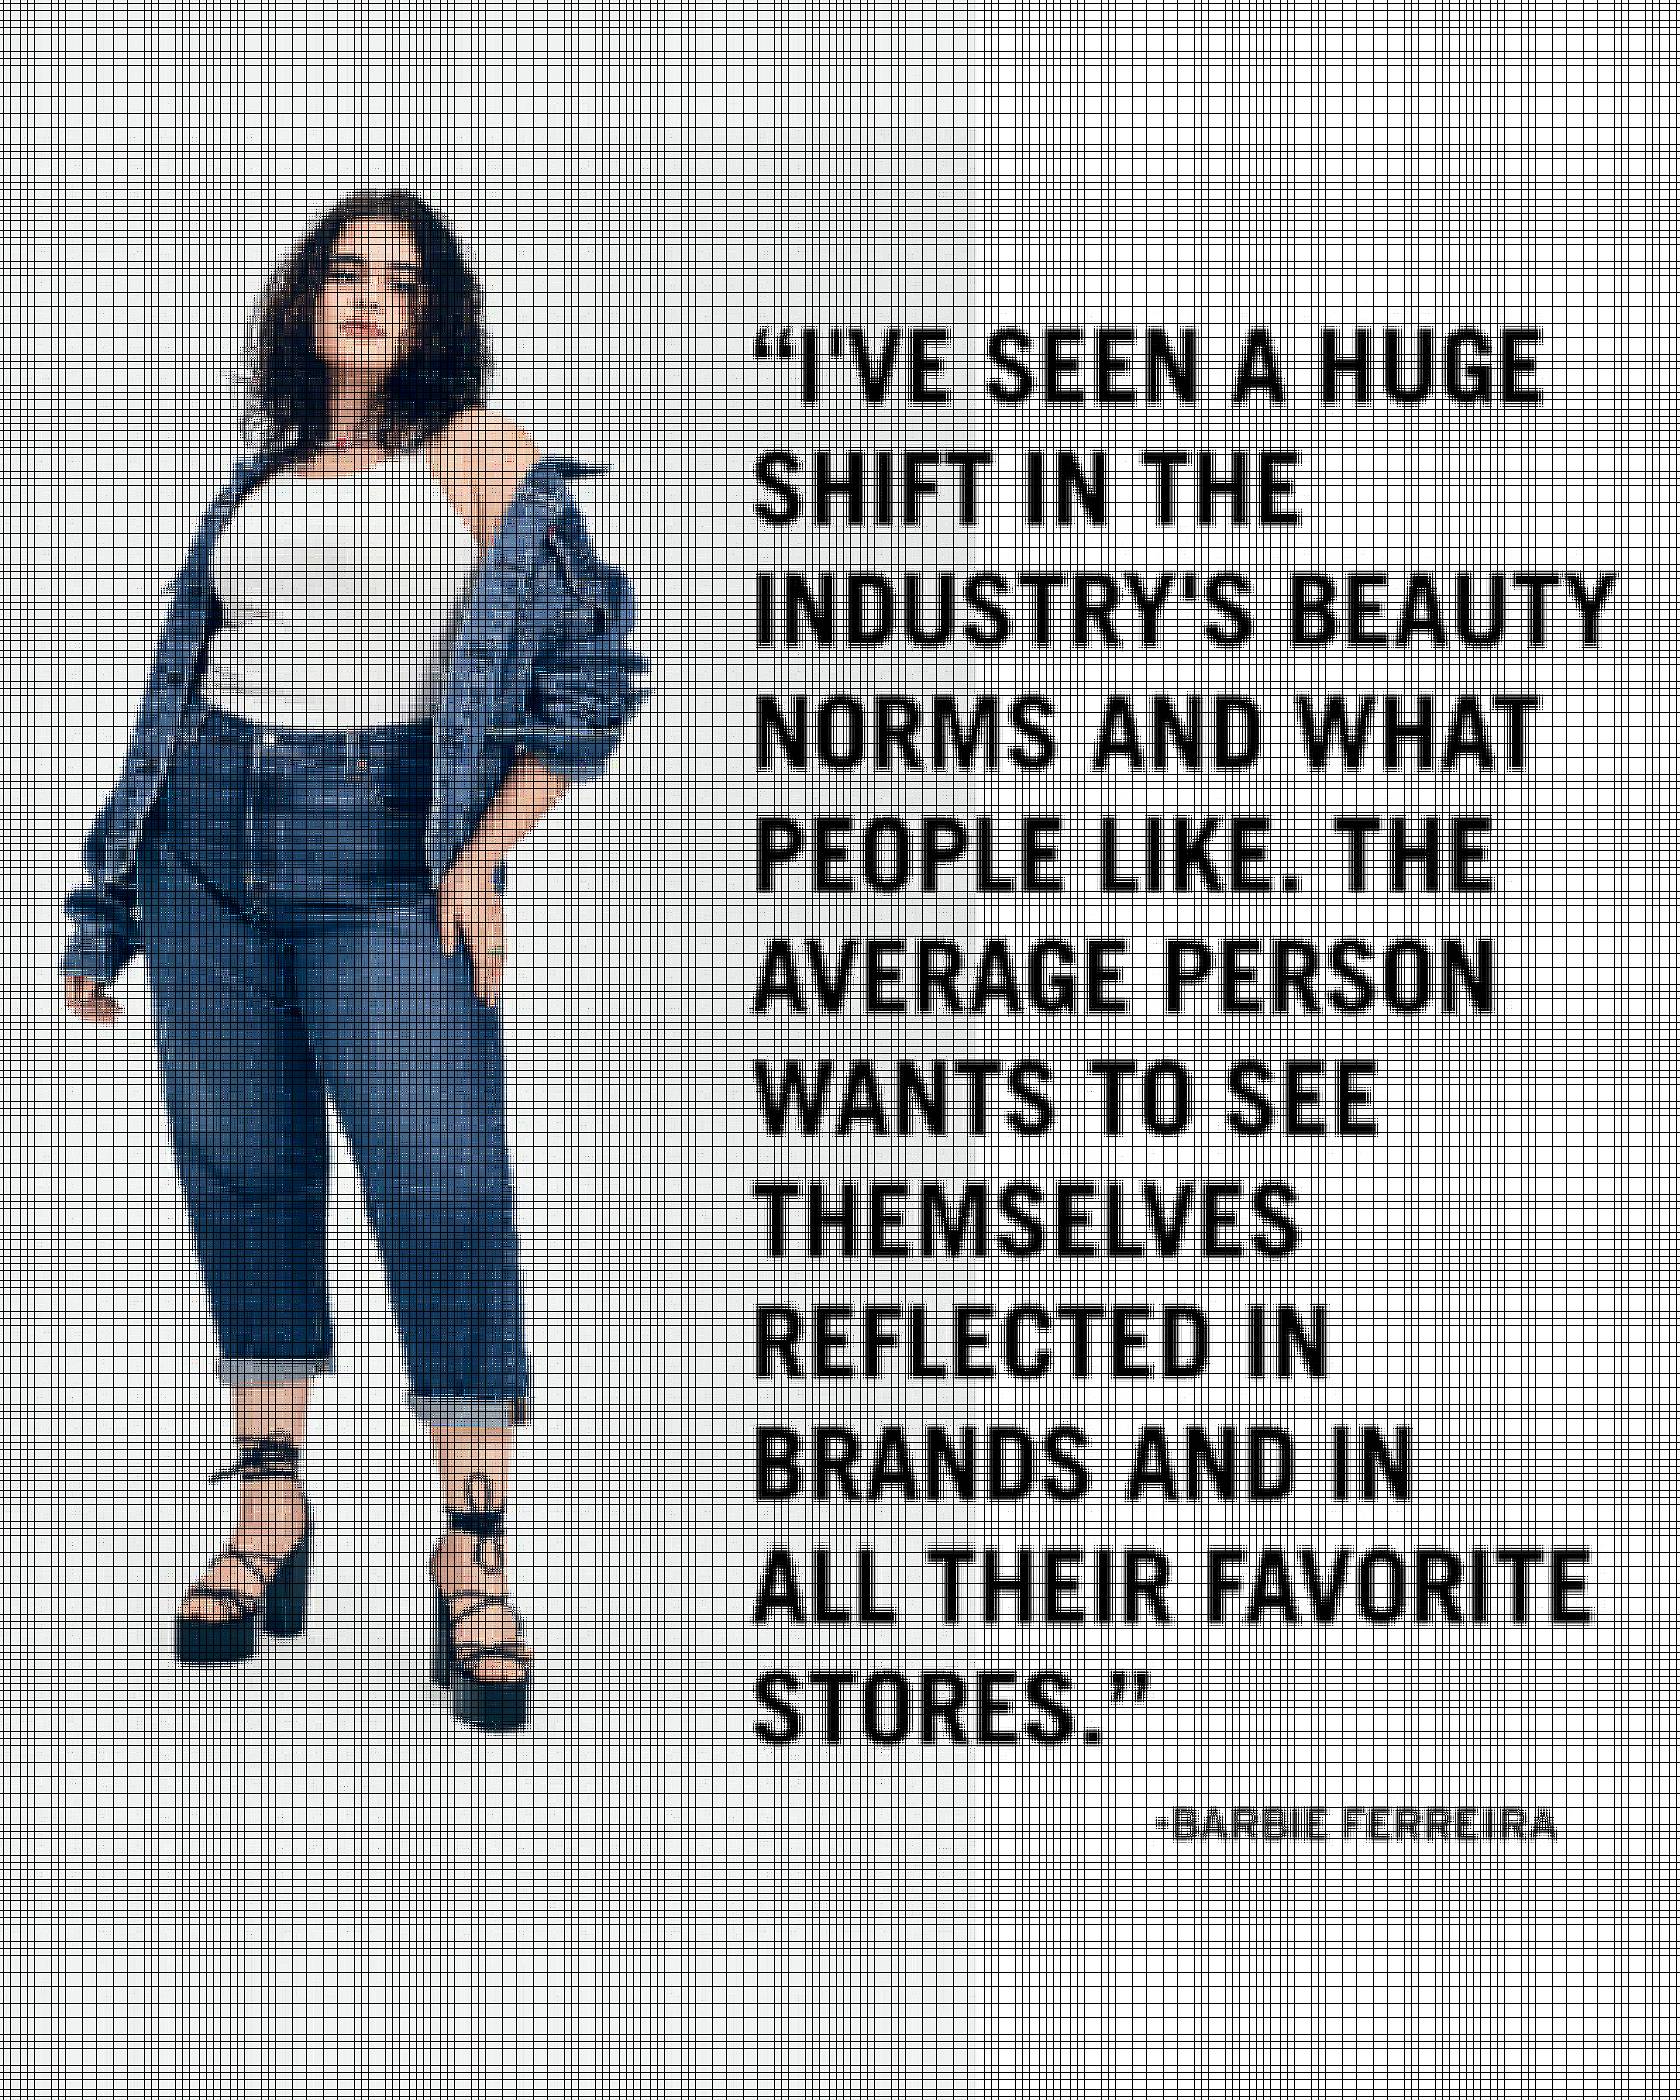 Barbie wearing a Levi's Trucker jacket and jeans overlaid with the quote, "I've seen a huge shift in the industry's beauty norms and what people like. The average person wants to see themselves reflected in brands and in all their favorite stores." - Barbie Ferreira